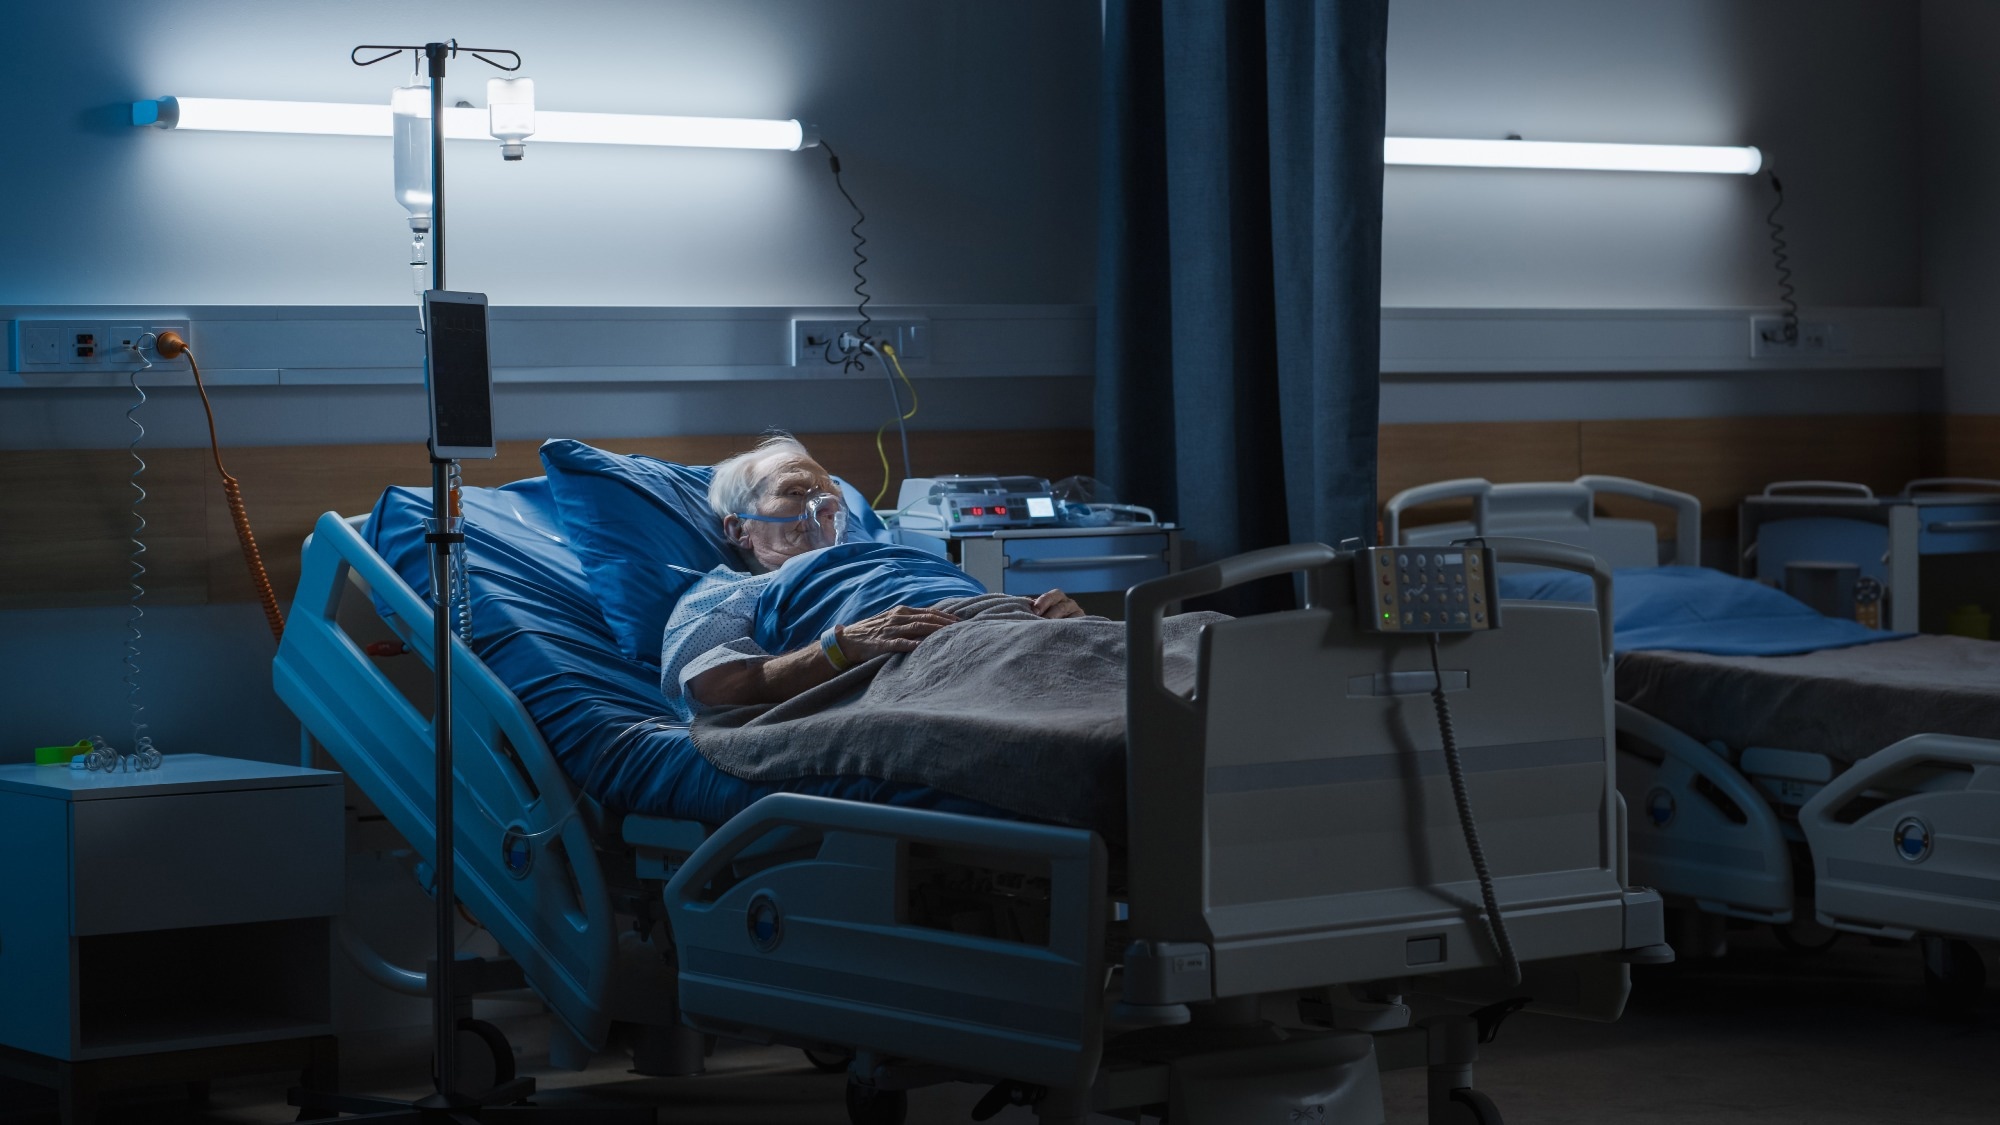 Study: Differences Between Reported COVID-19 Deaths and Estimated Excess Deaths in Counties Across the United States, March 2020 to February 2022. Image Credit: Gorodenkoff/Shutterstock